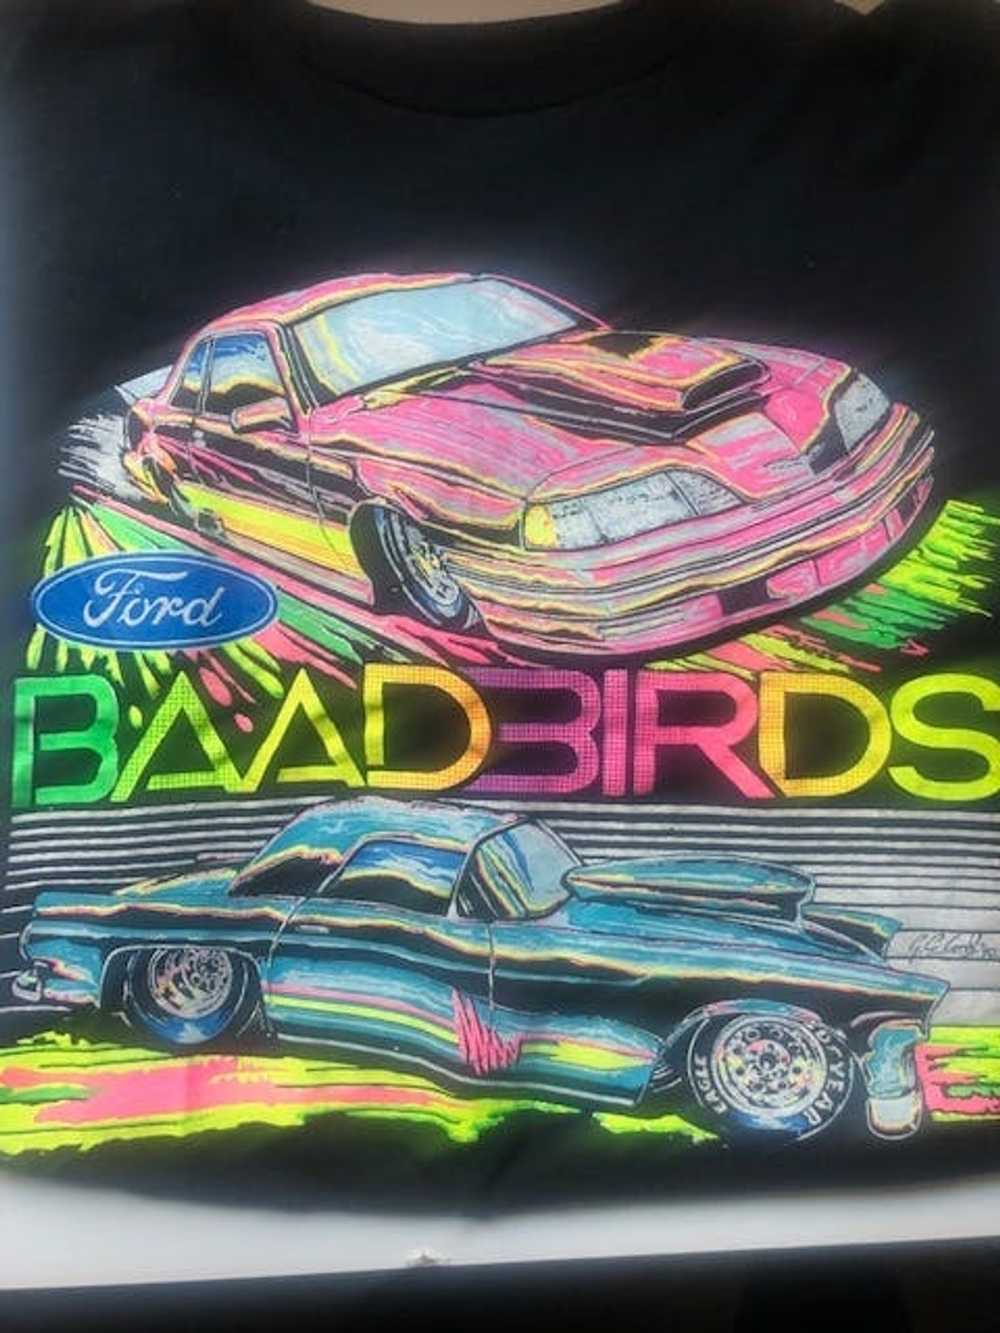 Ford Ford "Bad Birds" Vintage Tee - image 3